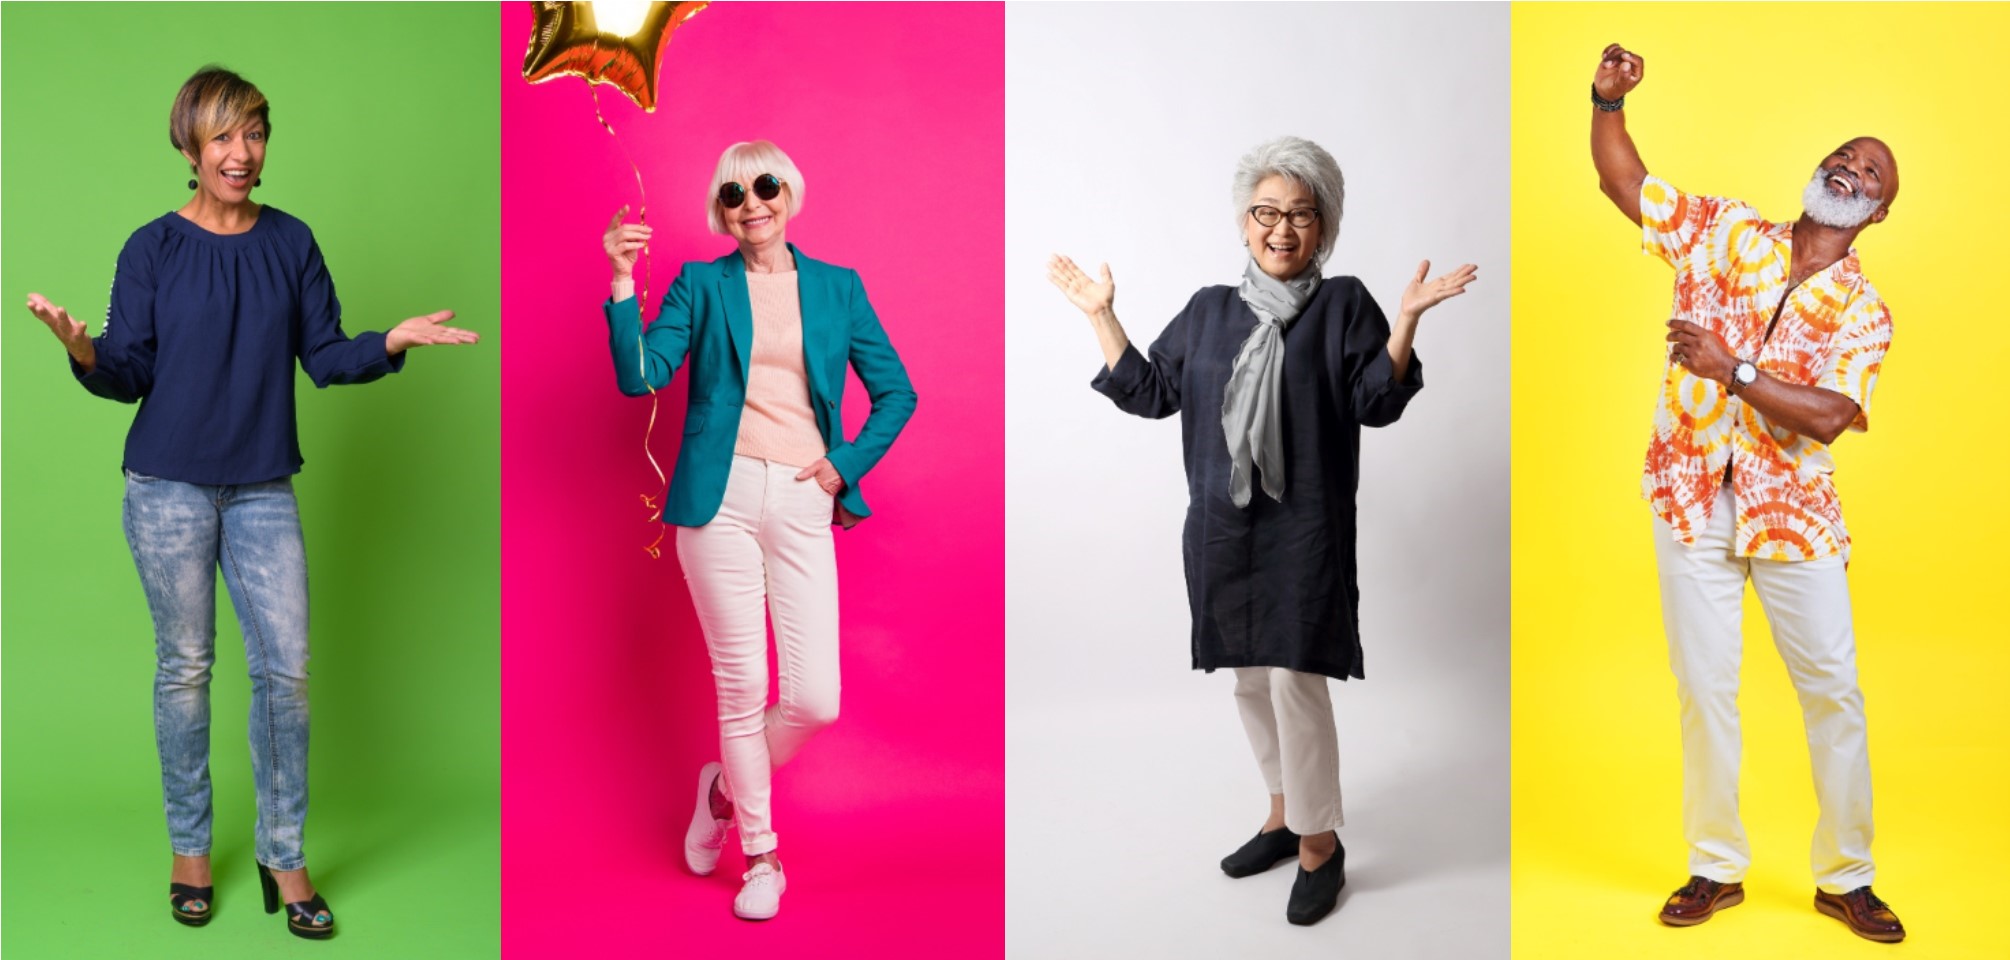 a series of 4 photos, each one features an older person on a brightly colored background